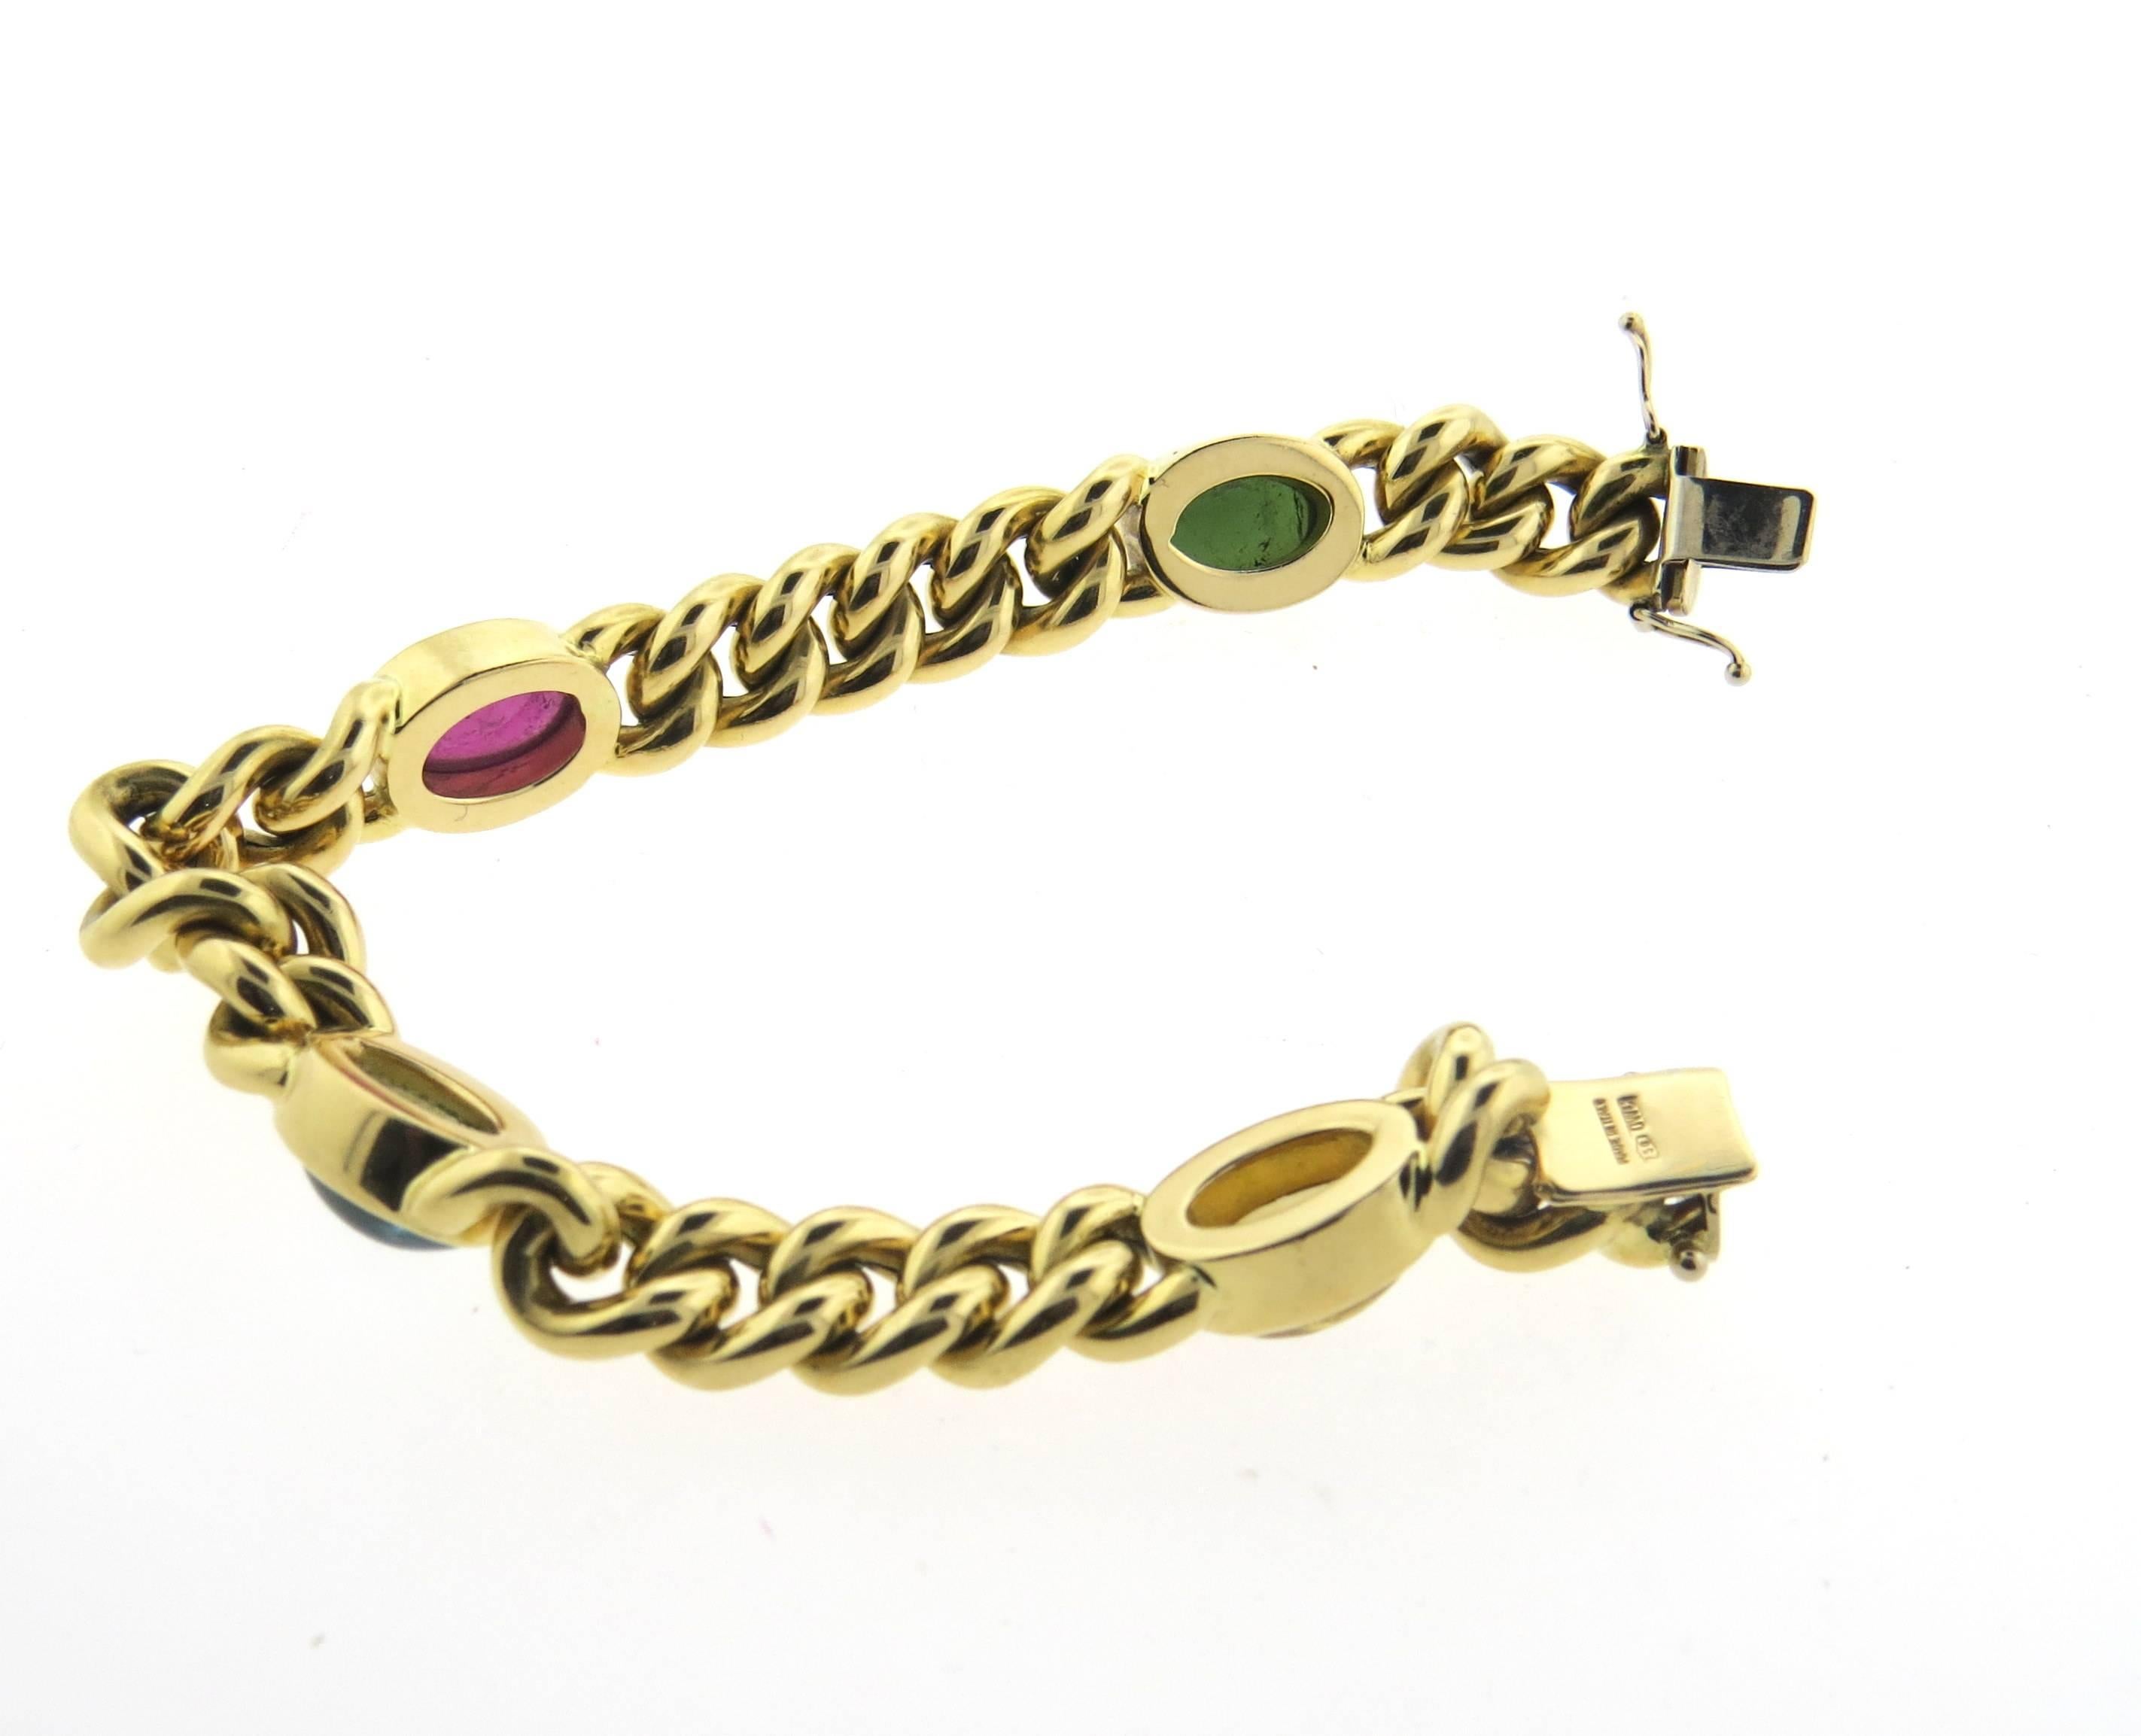 An 18k yellow gold bracelet, crafted by Italy, featuring four gemstone cabochons - pink and green tourmalines, citrine and blue topaz. Bracelet is 7 3/4